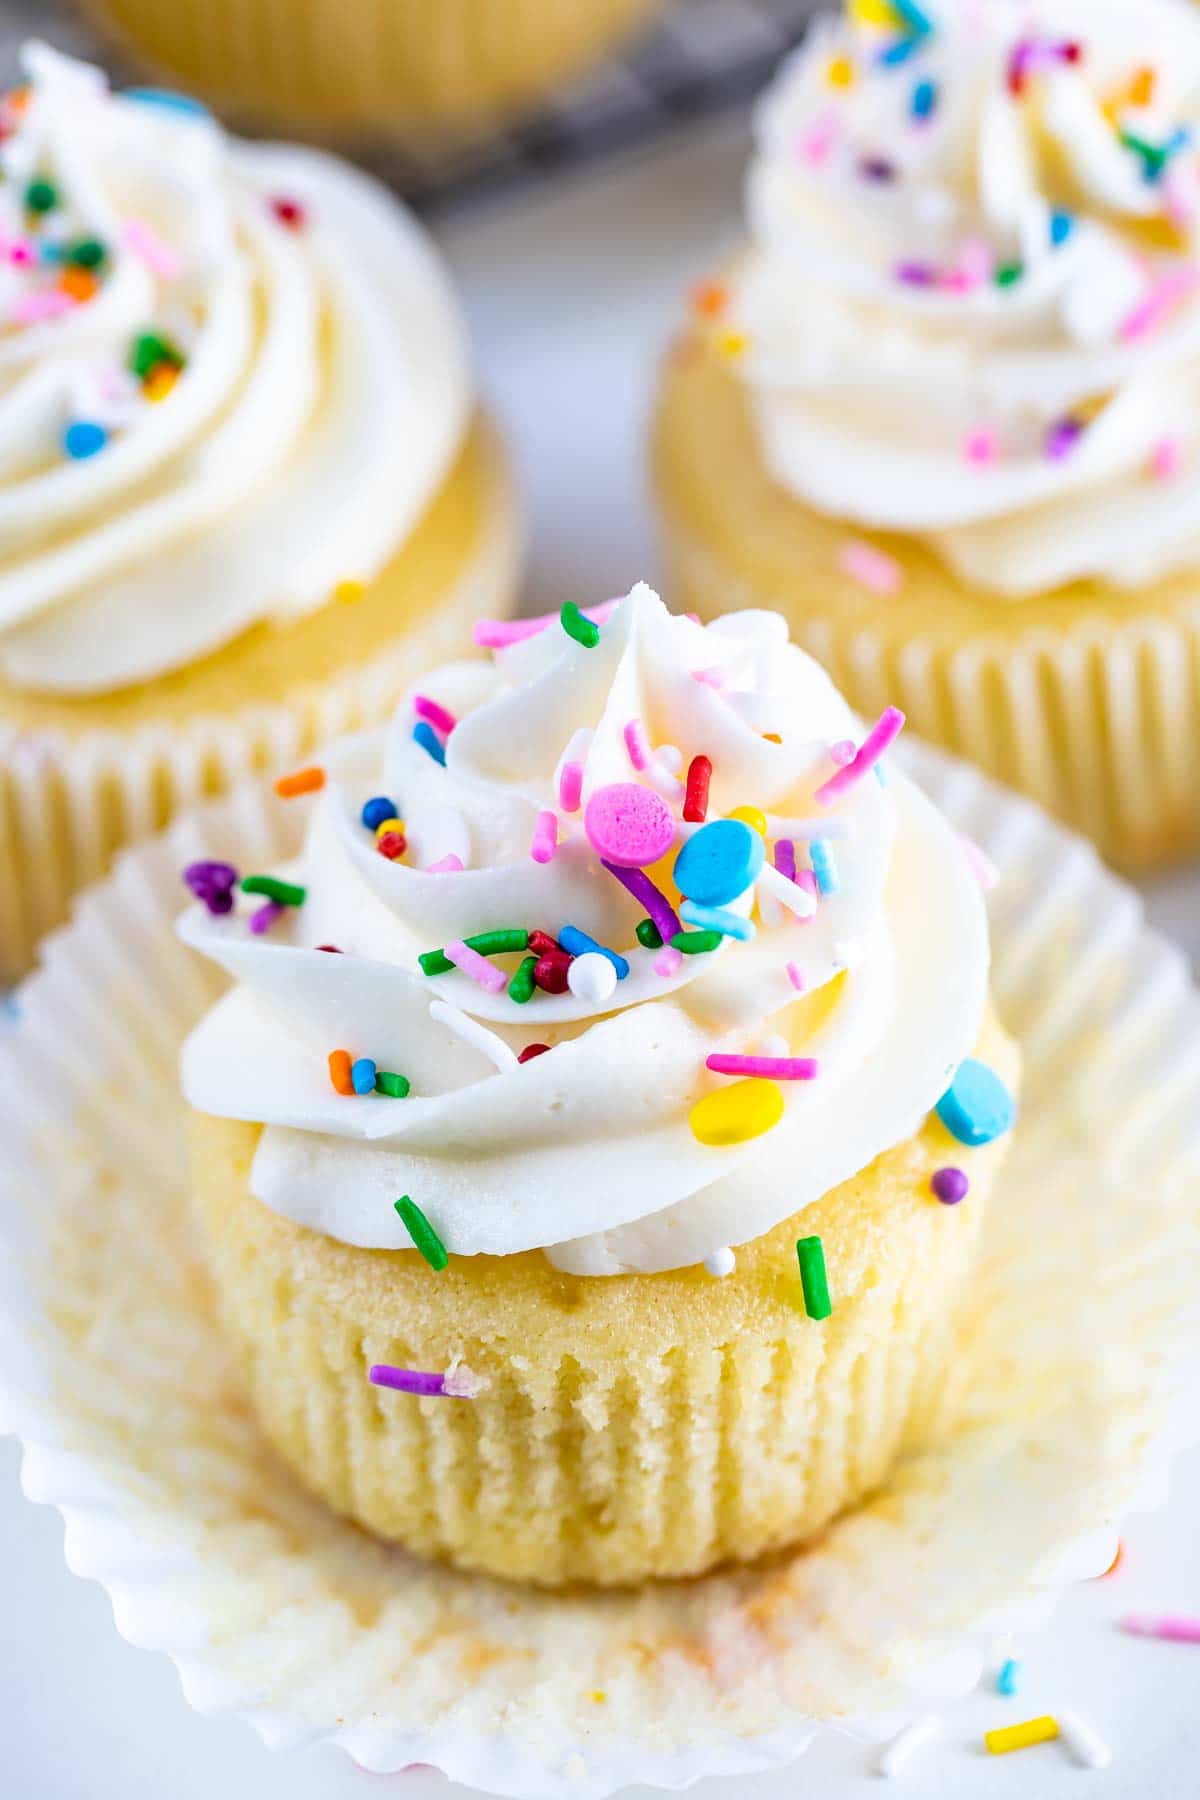 Vanilla Giant Cupcake Recipe  Baking, Recipes and Tutorials - The Pink  Whisk